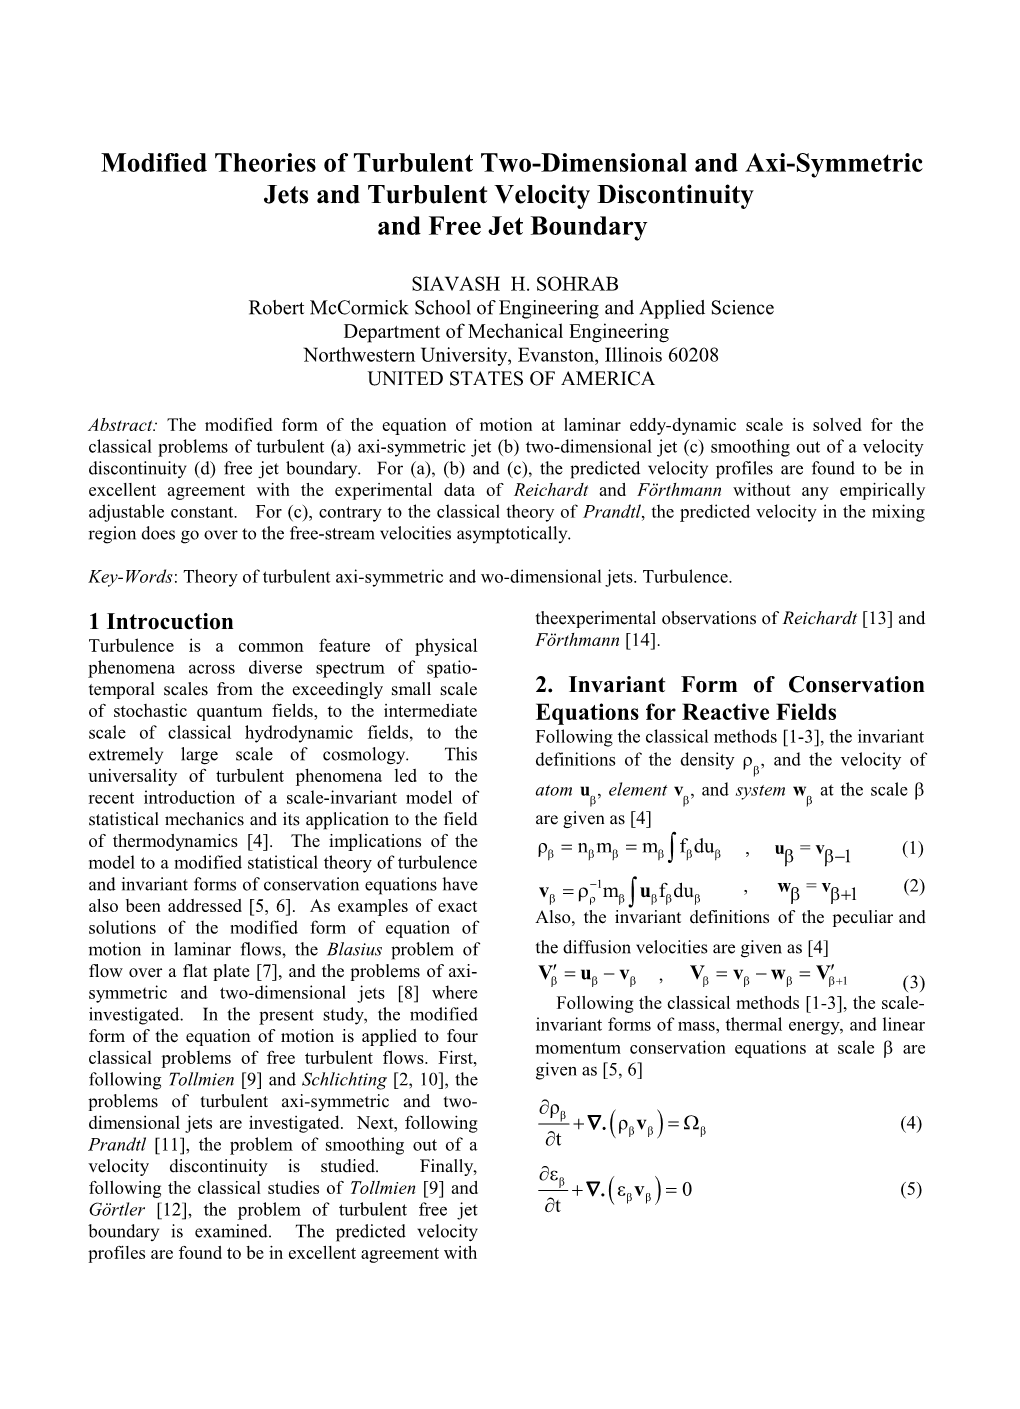 Modified Theories of Turbulent Two-Dimensional and Axi-Symmetric Jets and Turbulent Velocity